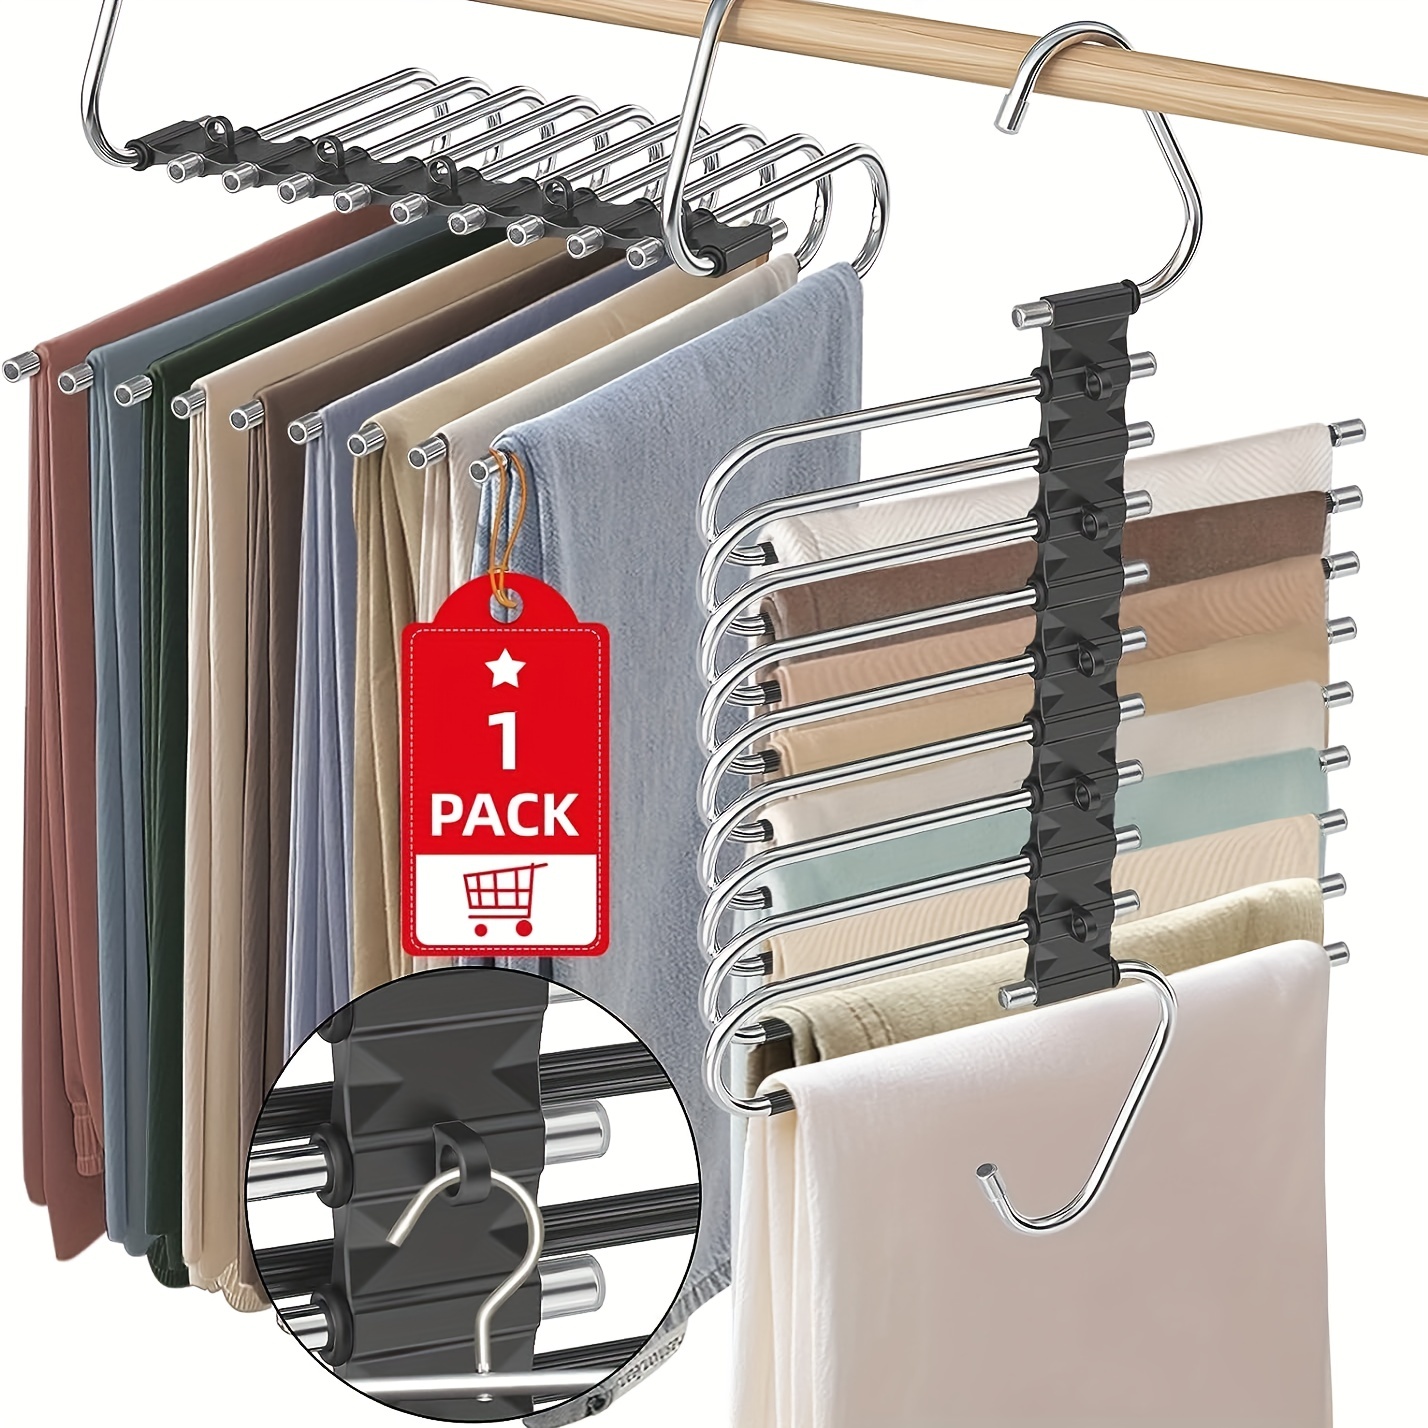 

1pc 9-tier Metal Pants Hangers With 5 Holes, Upgrade Anti-slip Storage Hanger, Household Storage Organizer Perfect For Bedroom, Bathroom, Home, Hanging, Drying